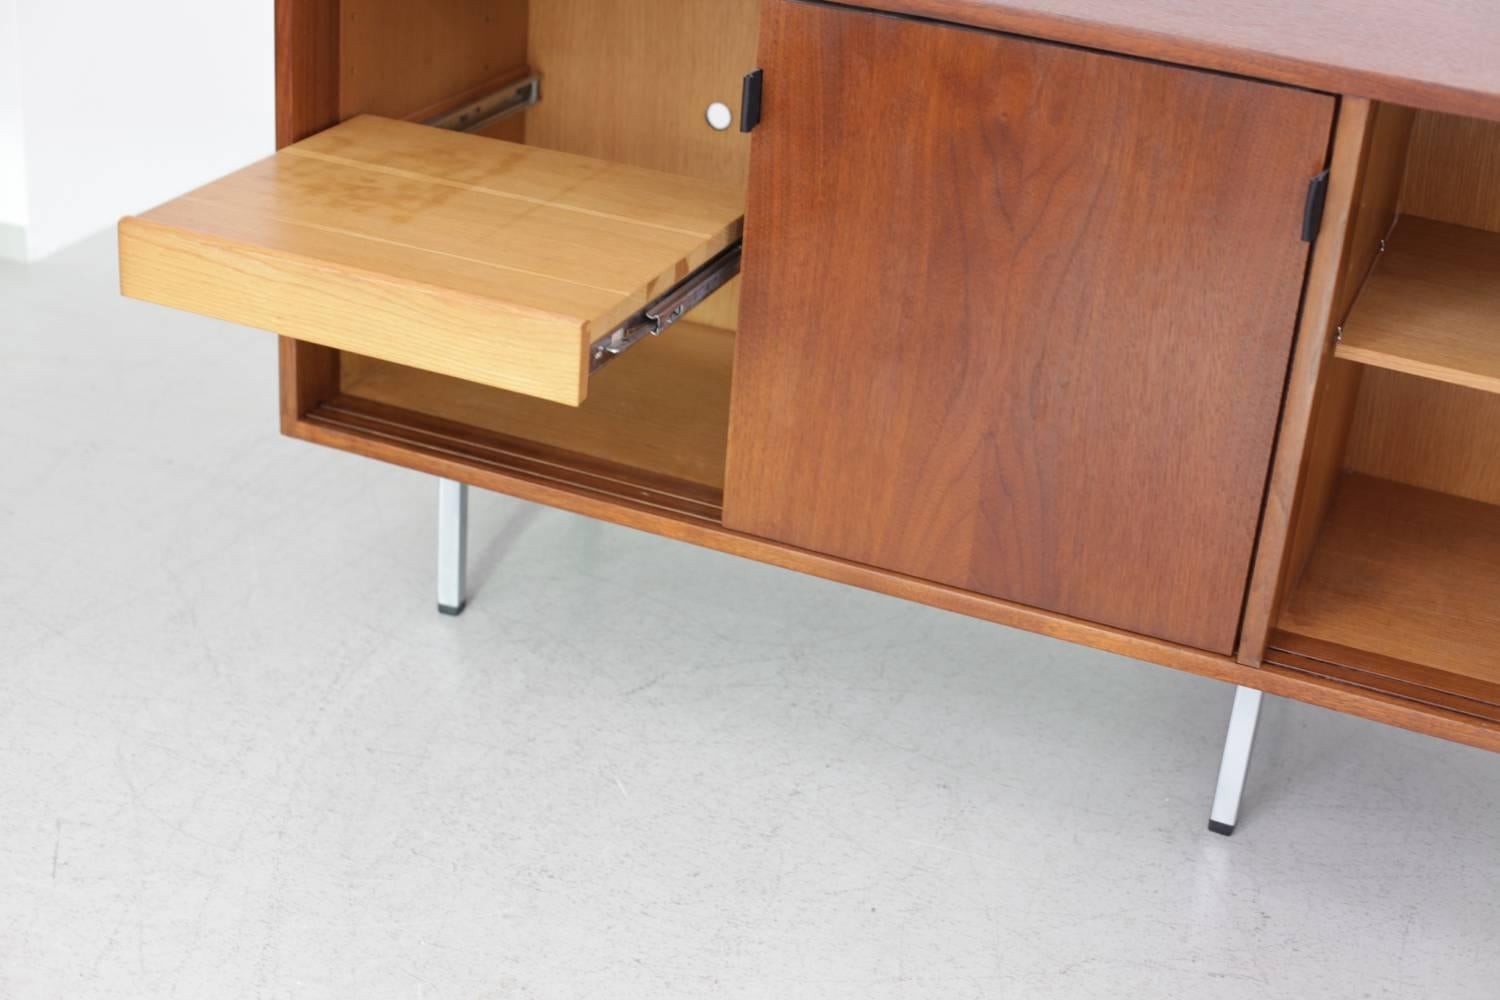 florence knoll sideboard